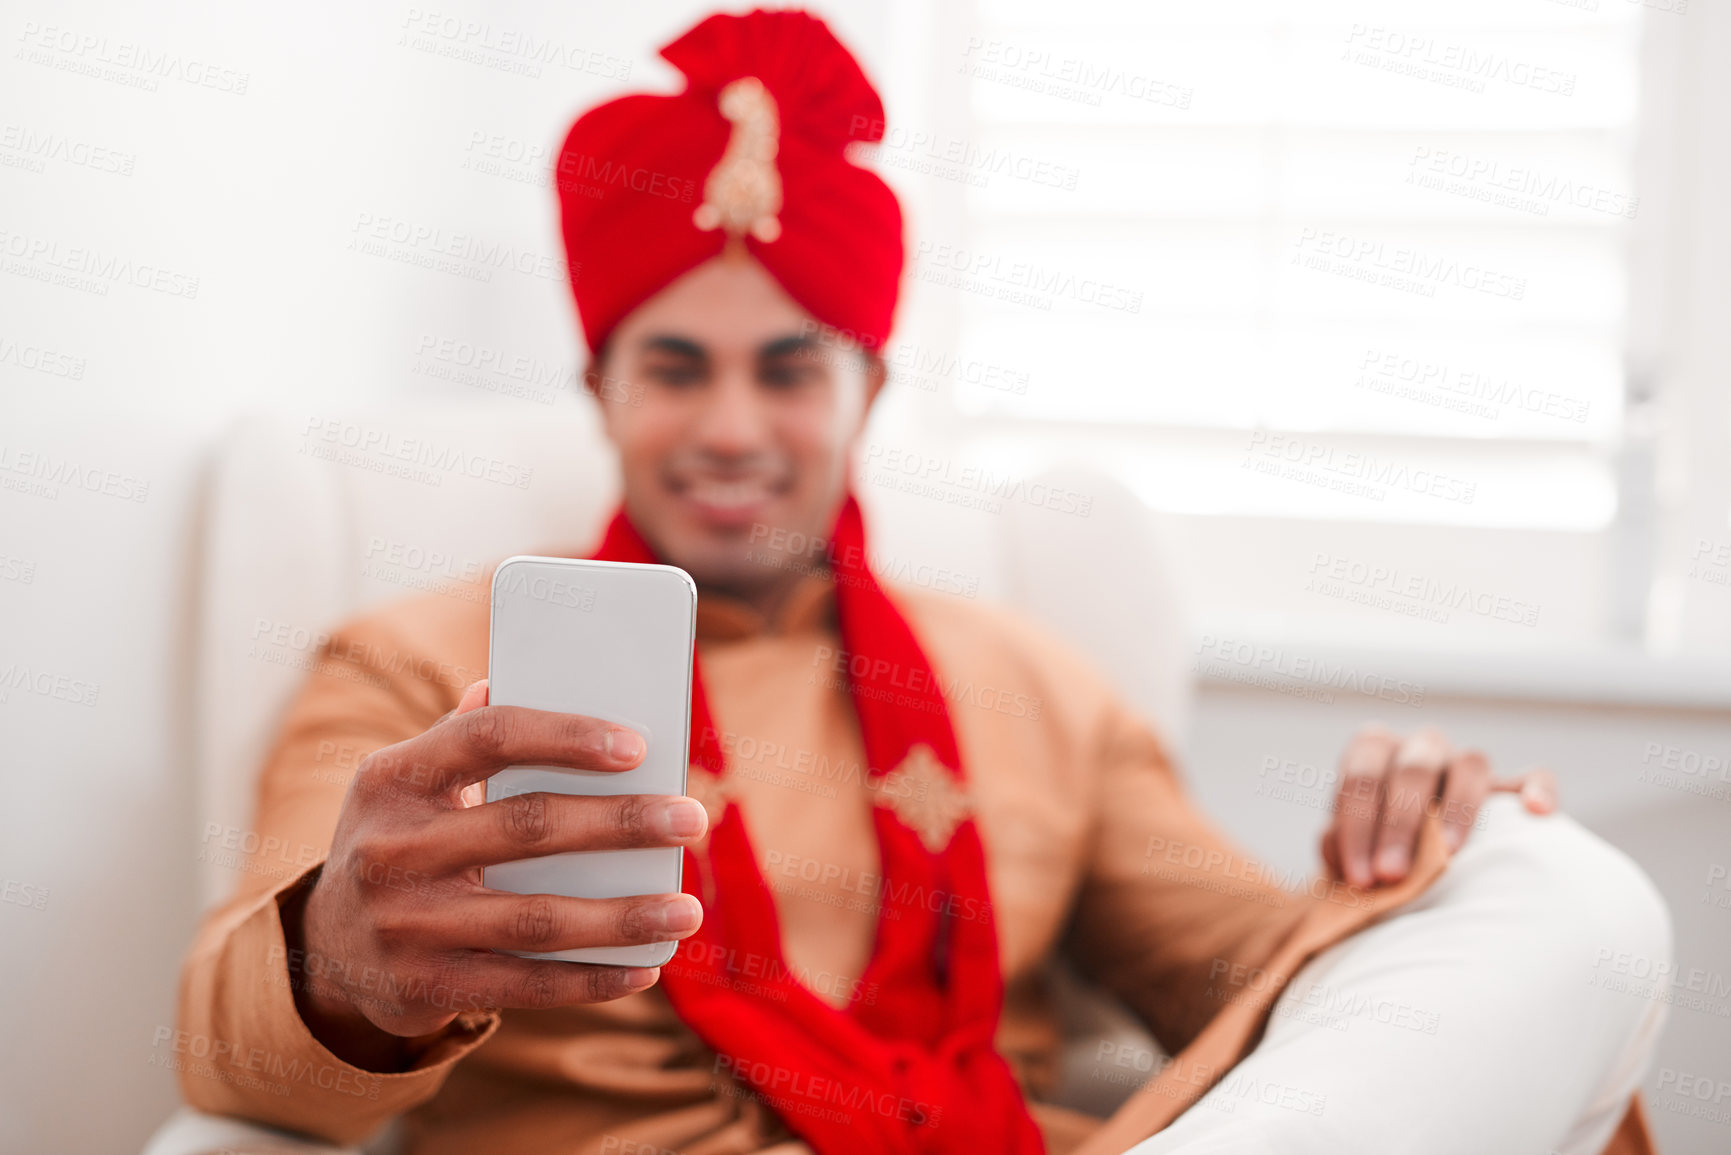 Buy stock photo Shot of a young man using a smartphone on his wedding day